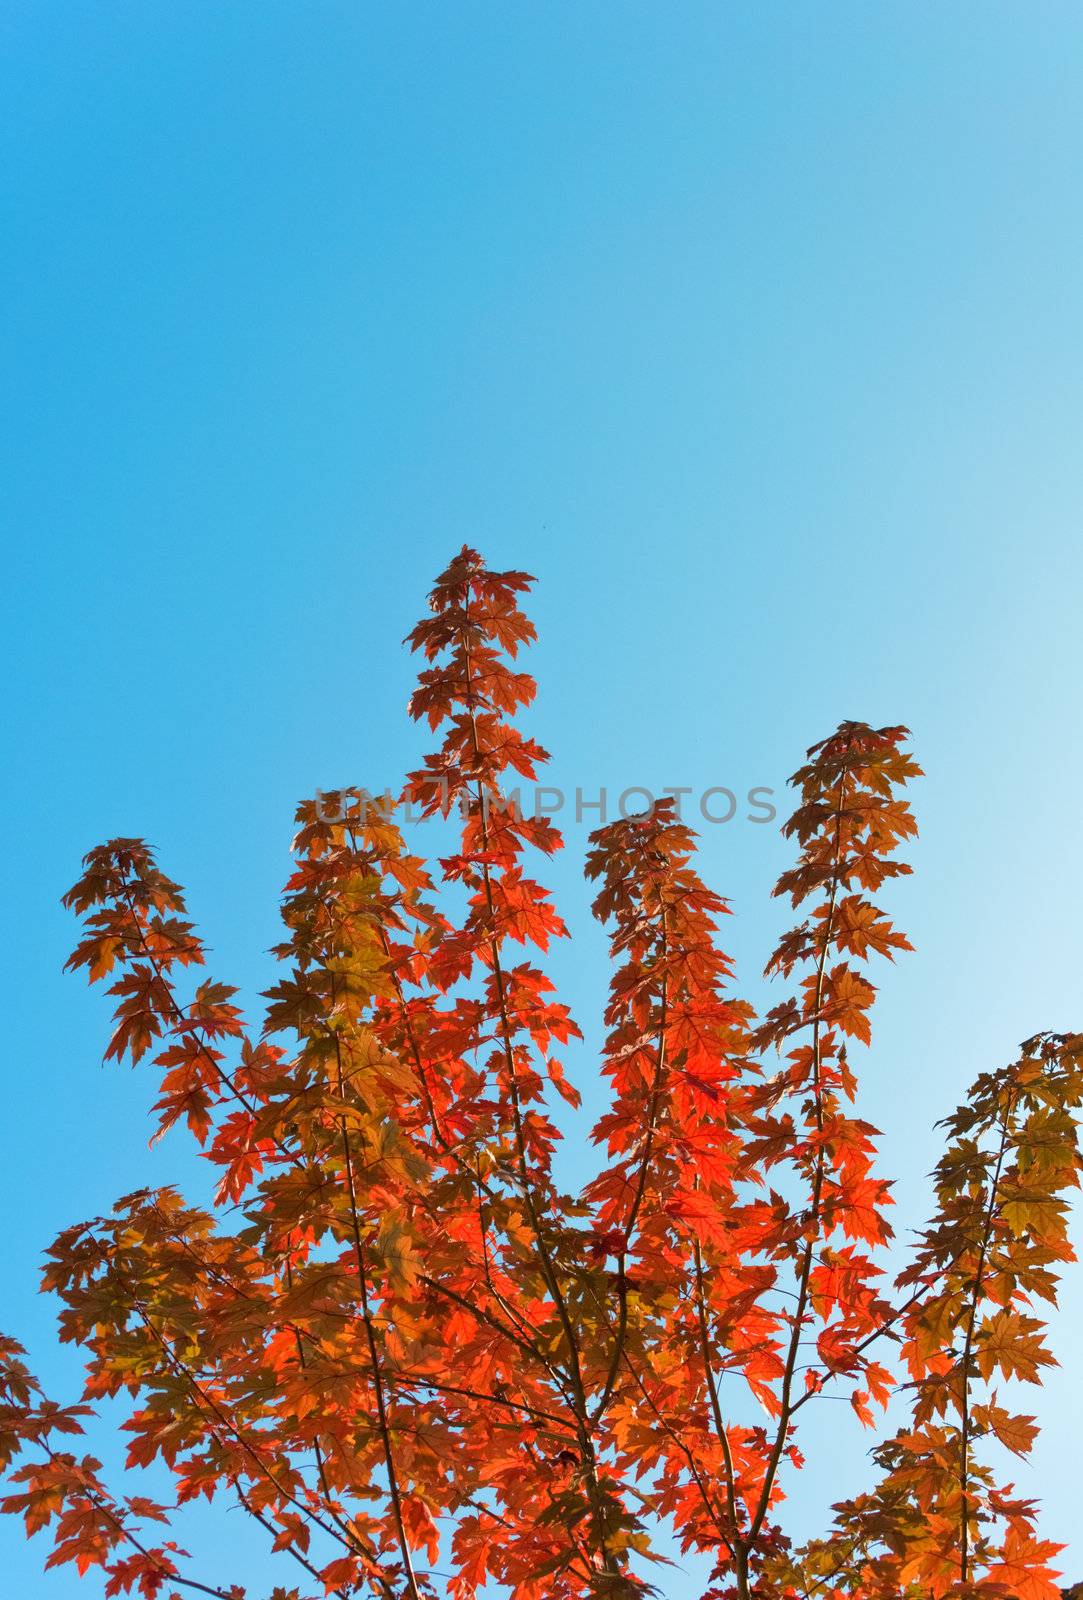 Maple tree  with red leaves against blue sky. Copy space